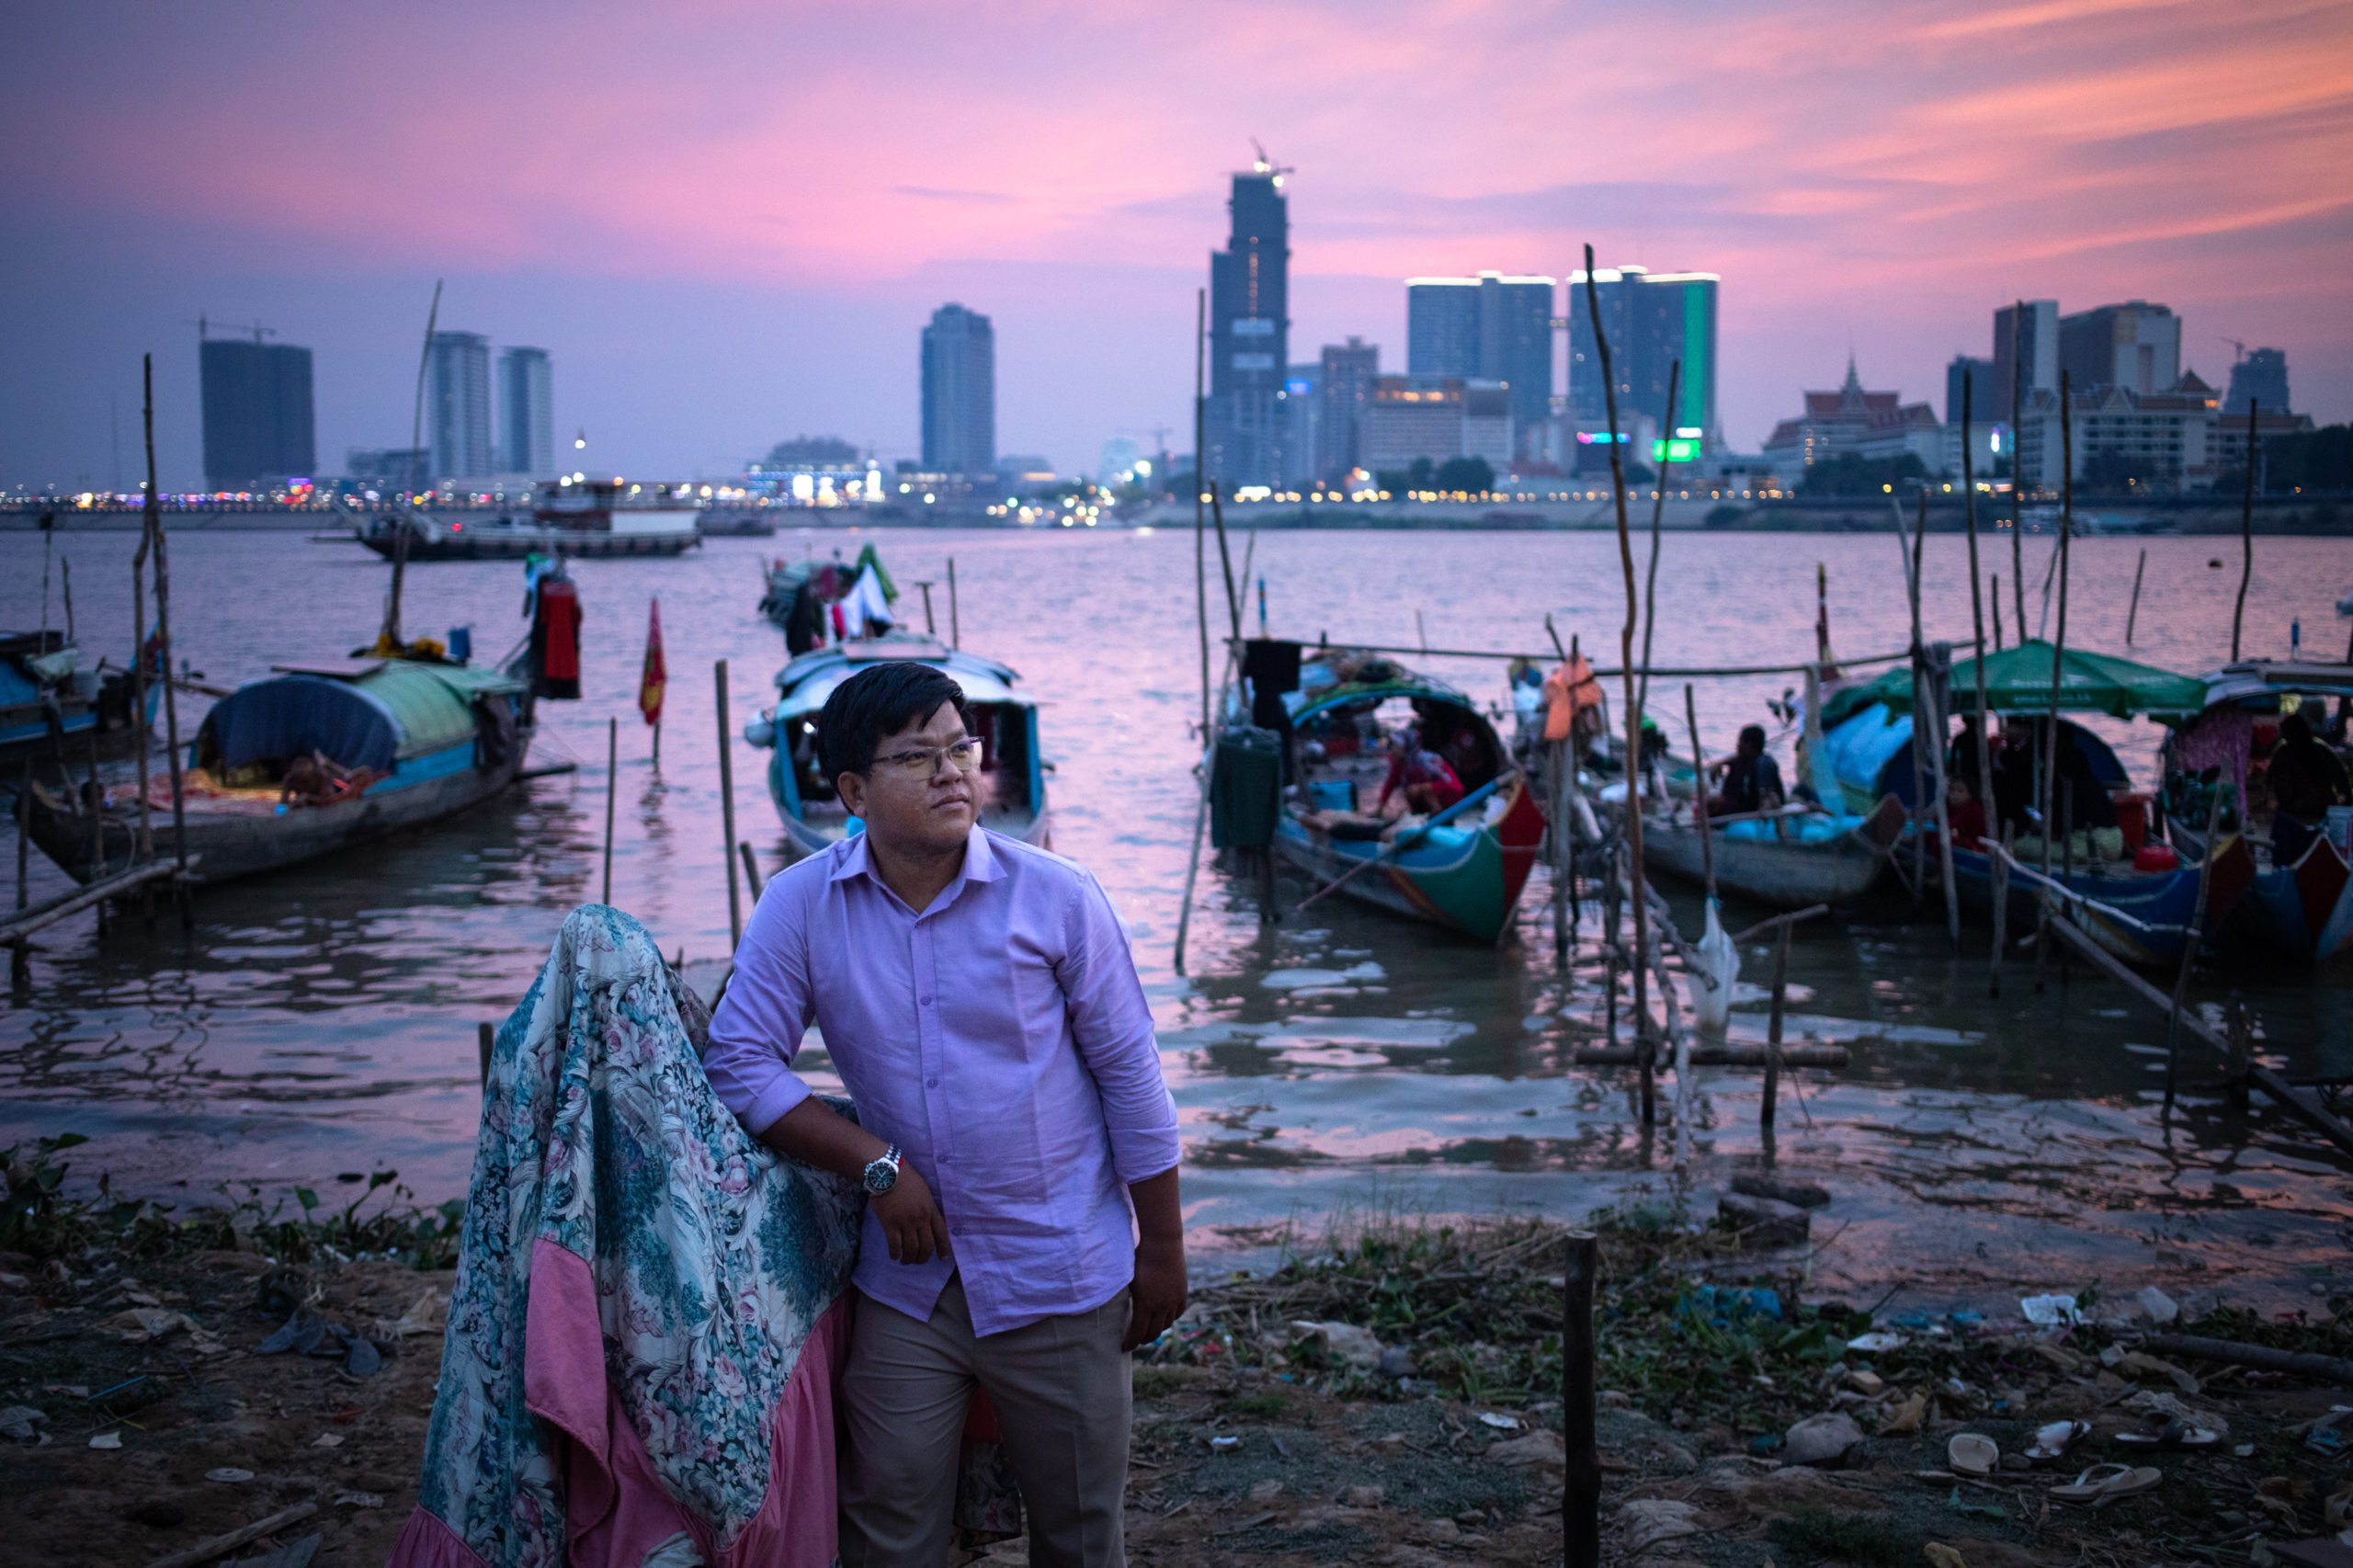 Senglong Youk, Waterkeeper of the Mekong and Tonle Sap poses for a photo in front of a Cham muslim fishing community in Chrouy Changvar, a peninsula between both rivers on the outskirts of Phnom Penh. Phnom Penh, Cambodia. 